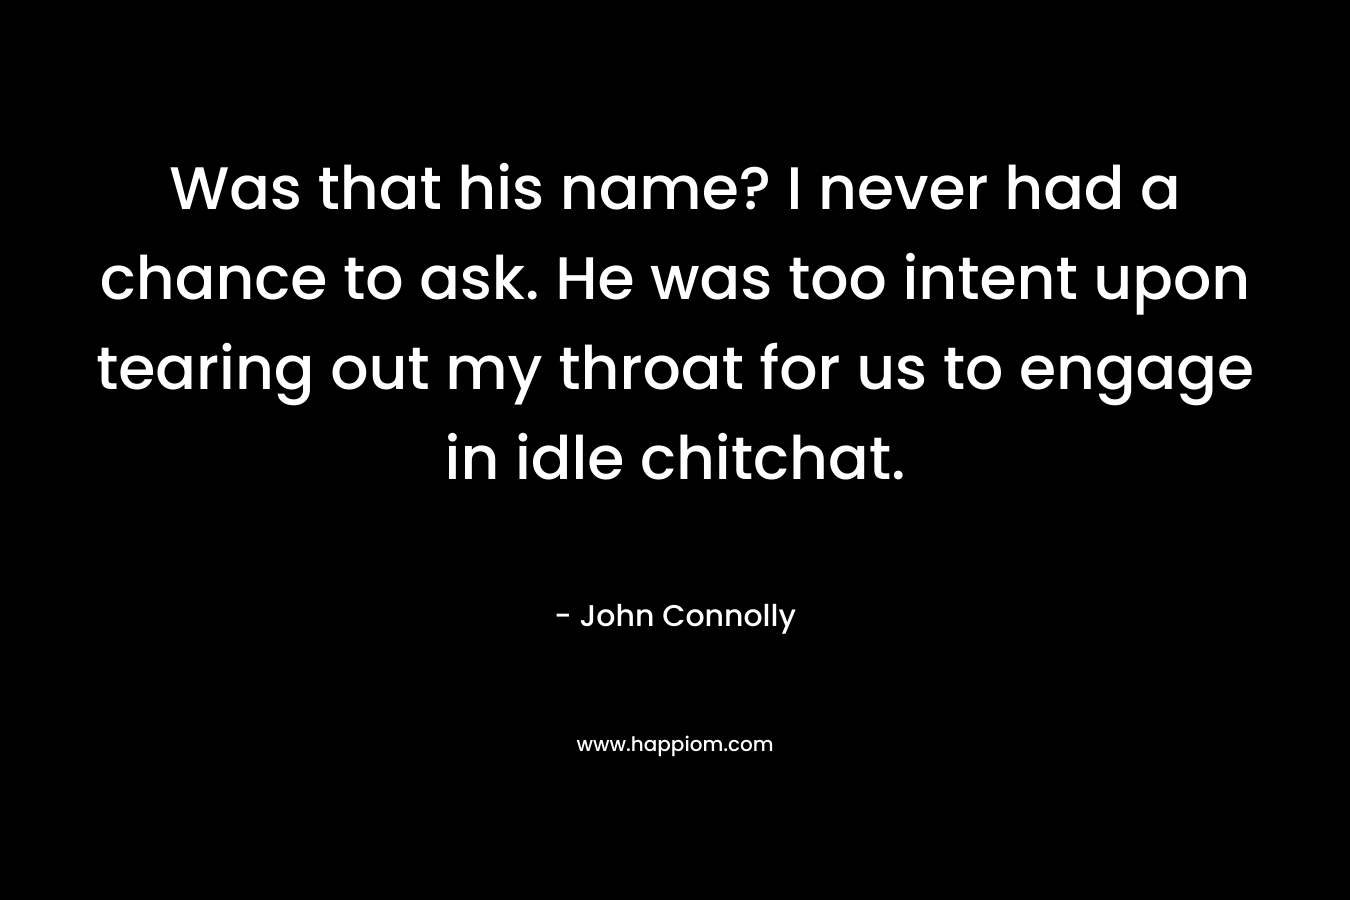 Was that his name? I never had a chance to ask. He was too intent upon tearing out my throat for us to engage in idle chitchat. – John Connolly